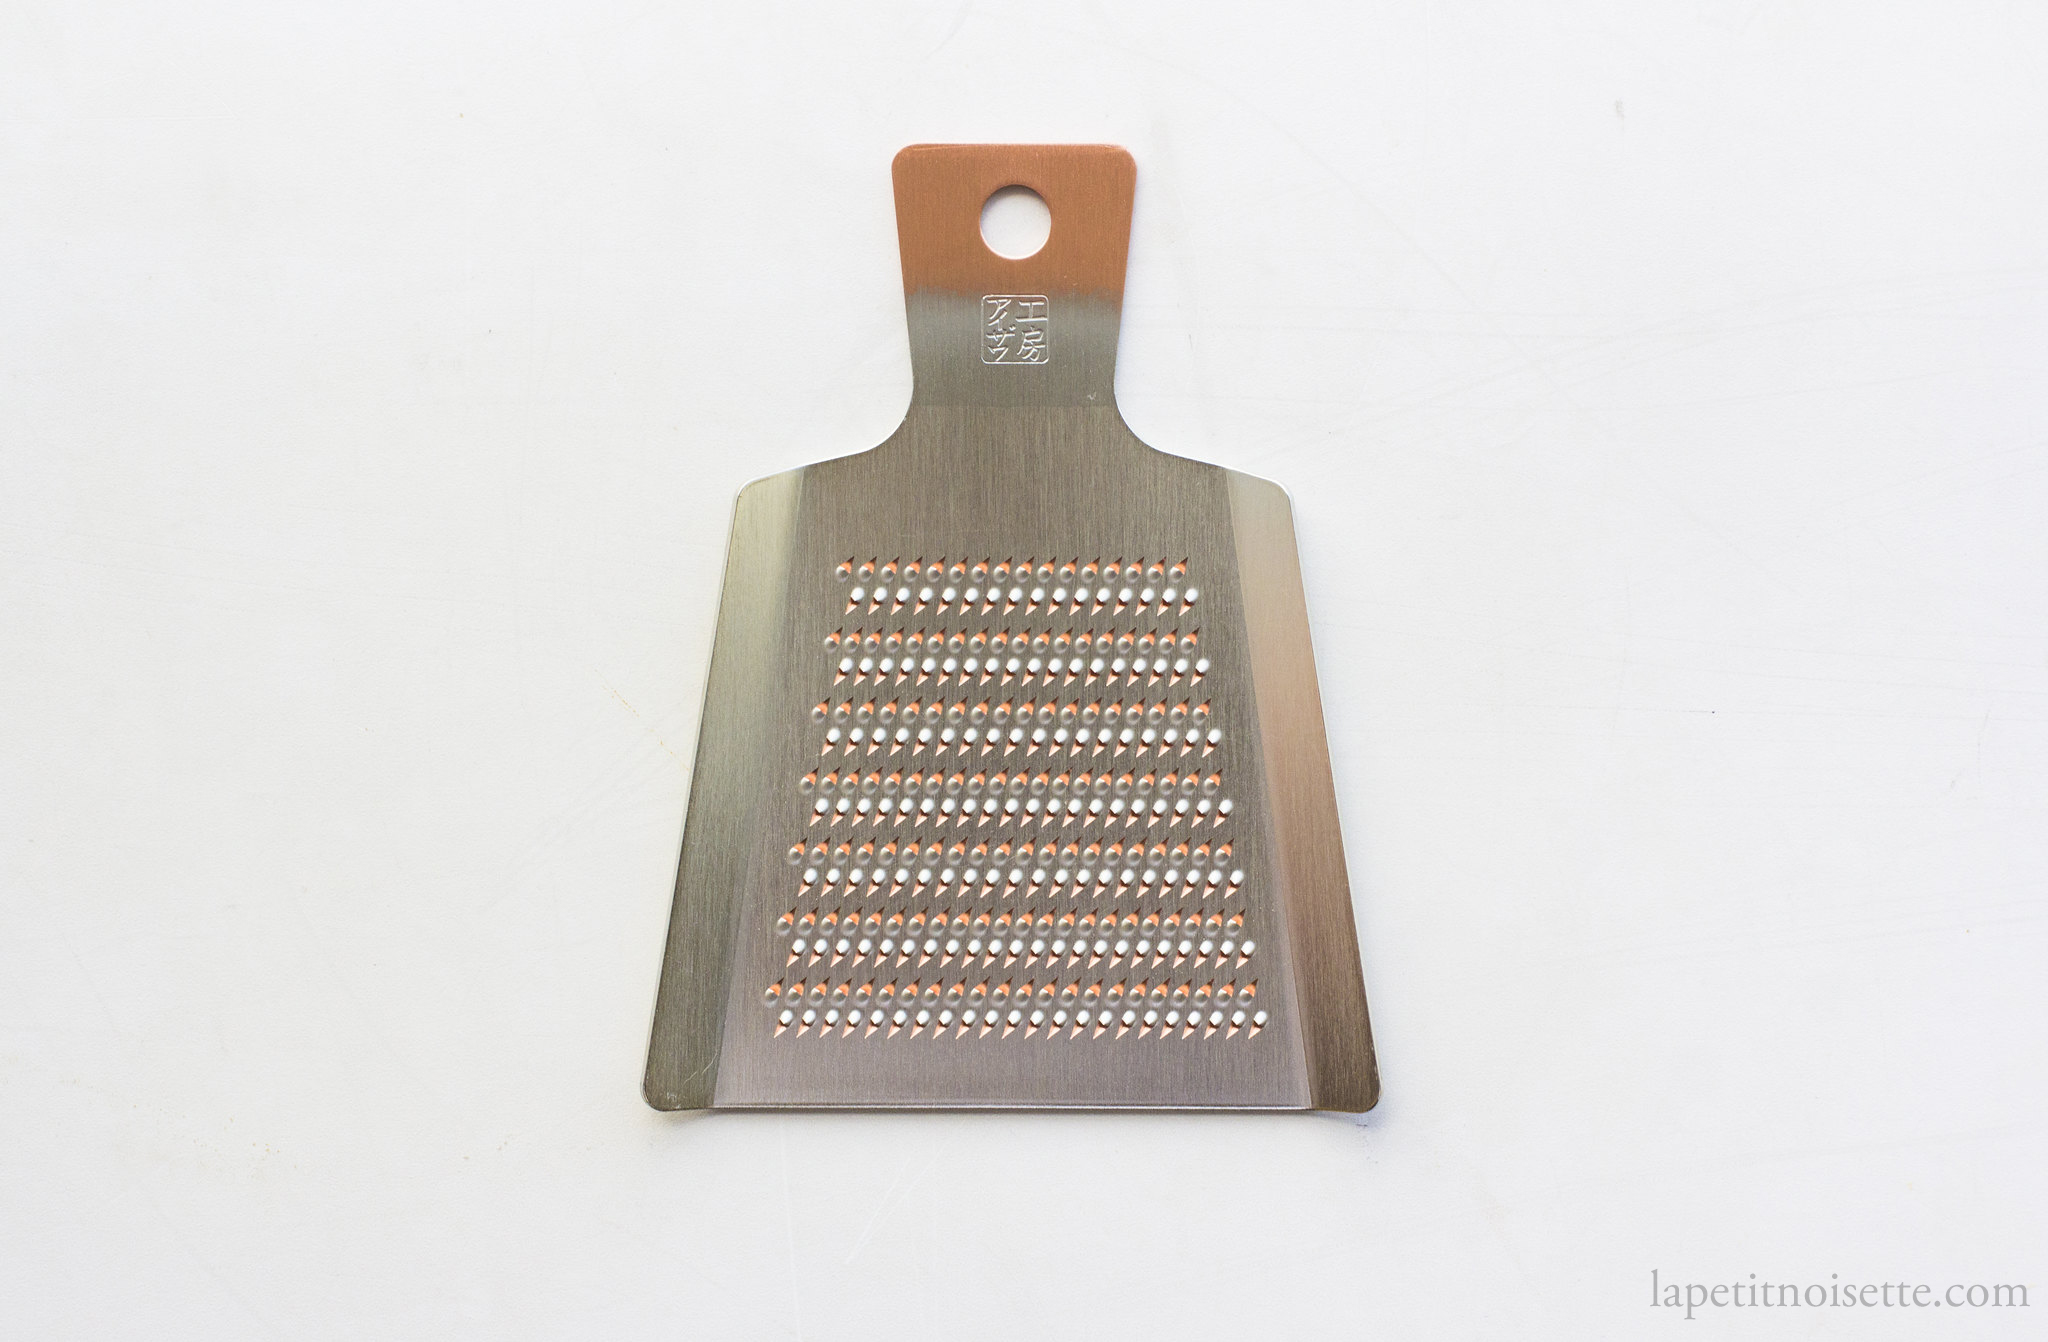 Traditional metal grater for wasabi.